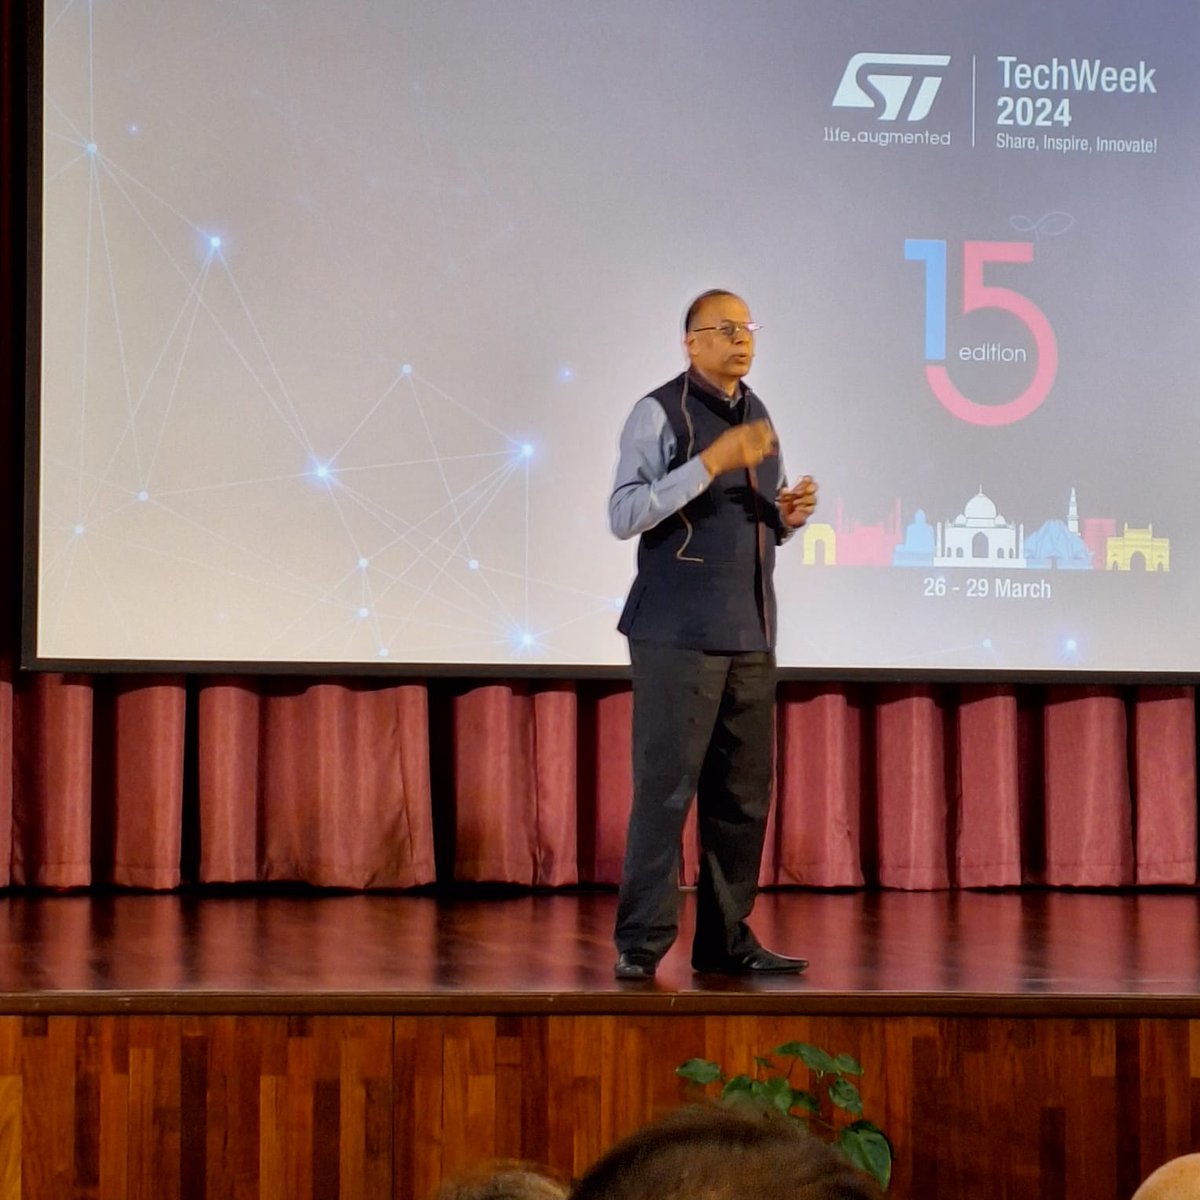 Privileged to be Chief Guest of STMicro TechWeek 2024 and deliver a talk on Innovation Ecosystem in India. This global academic event in fields of semiconductor design & mfg tech for 50000 engineering and technical community of ST who joined from 65 different locns worldwide